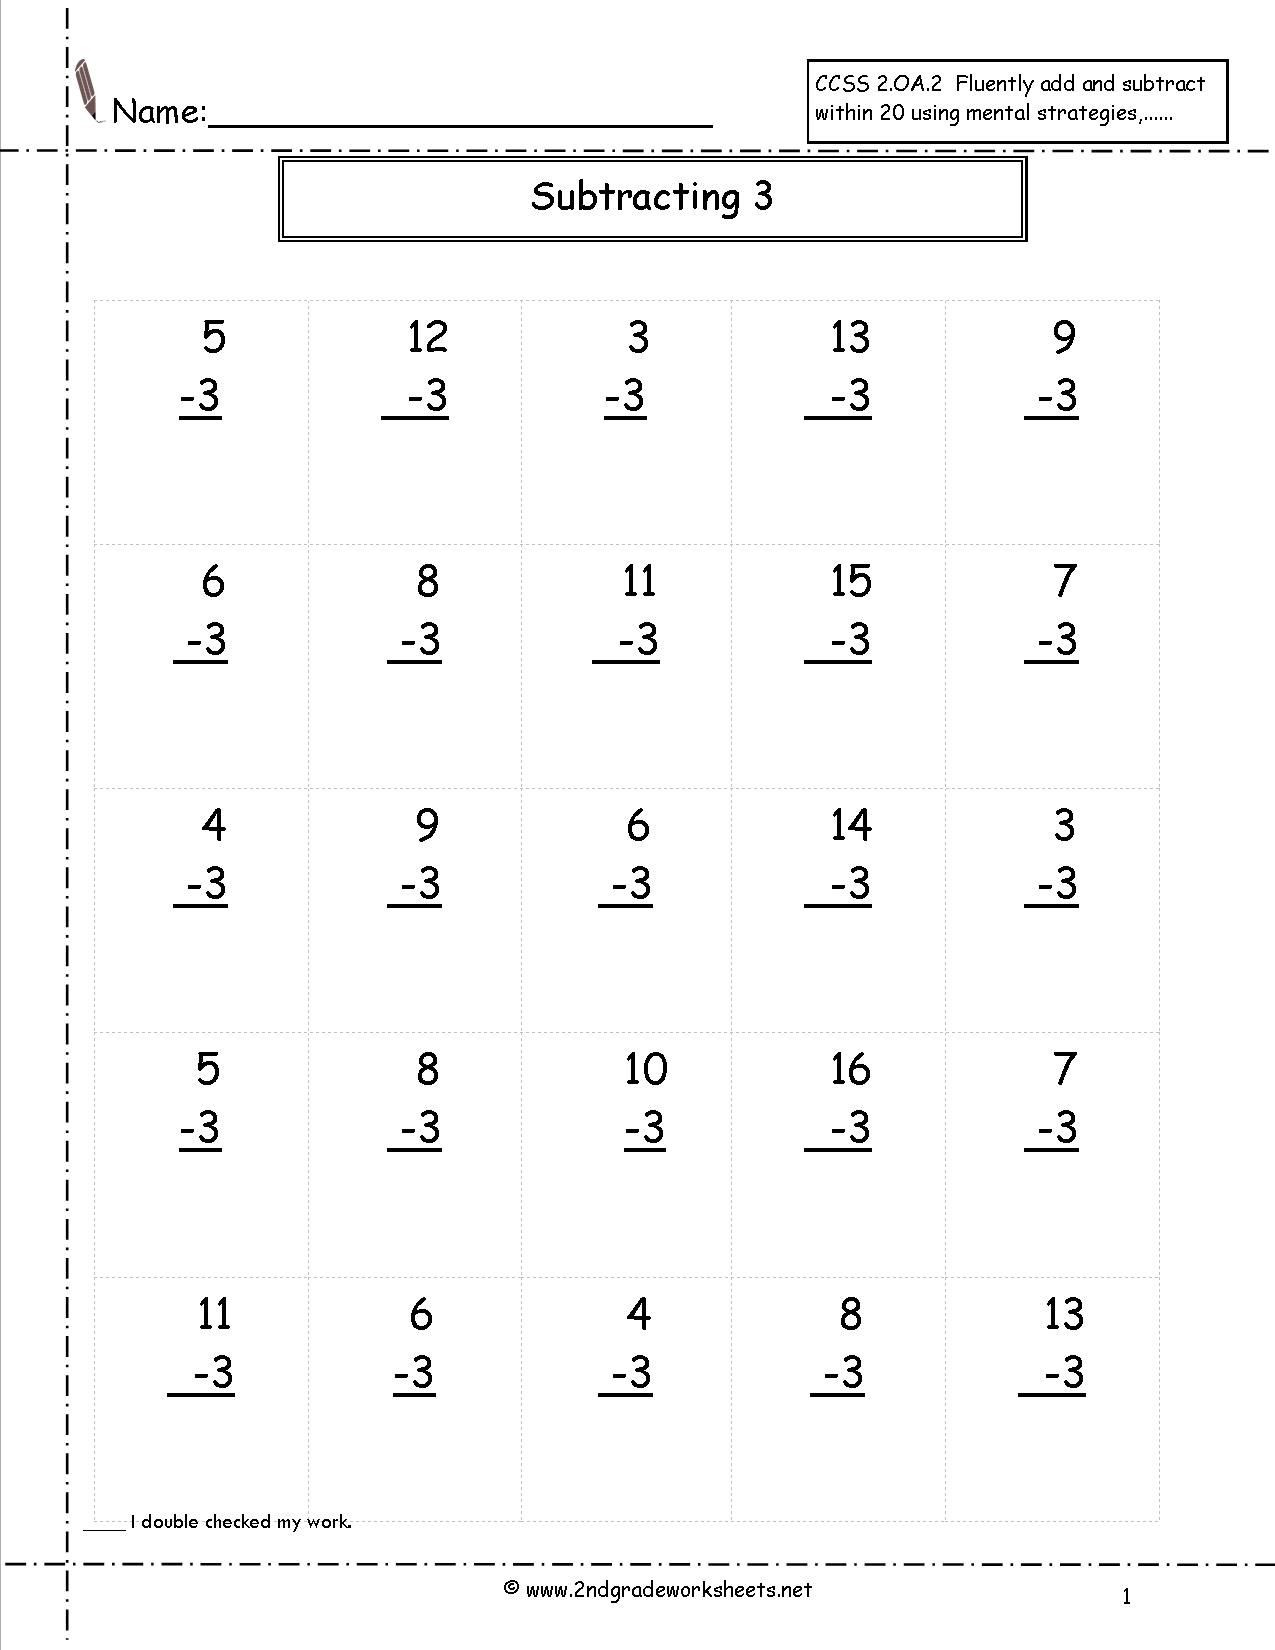 Free Math Worksheets Second Grade 2 Subtraction Add and Subtract 4 Single Digit Numbers